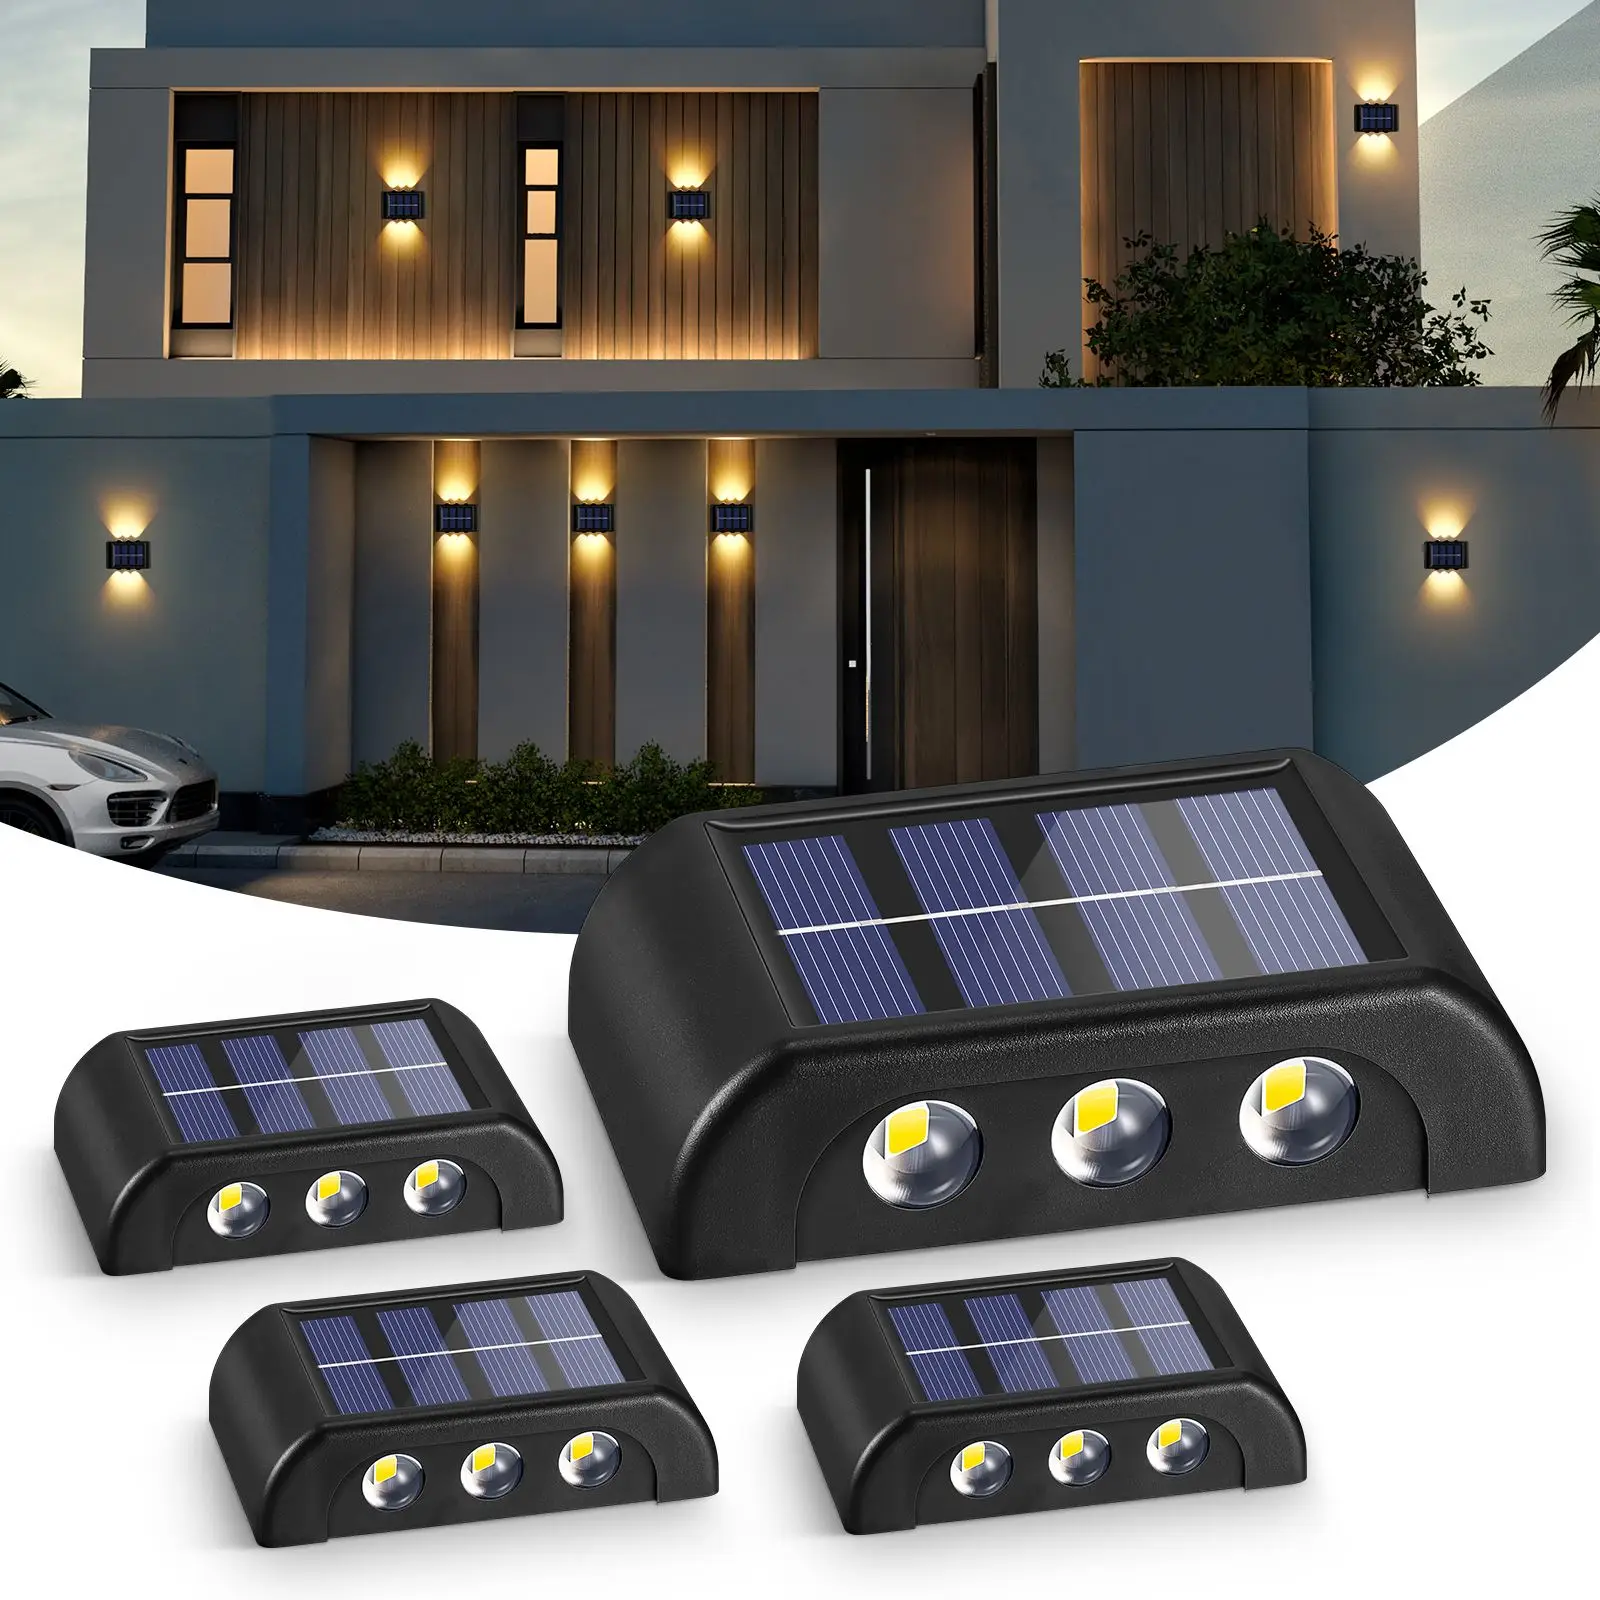 outdoor solar lights 4led 6led 8led warm light waterproof wall lamp up and down luminous garden decoration solar lamp Solar Wall Lights 6LED Outdoor IP65 Waterproof Garden Fence Decoration Warm Light Solar Lamp For Street Patio Yard Balcony Lamps